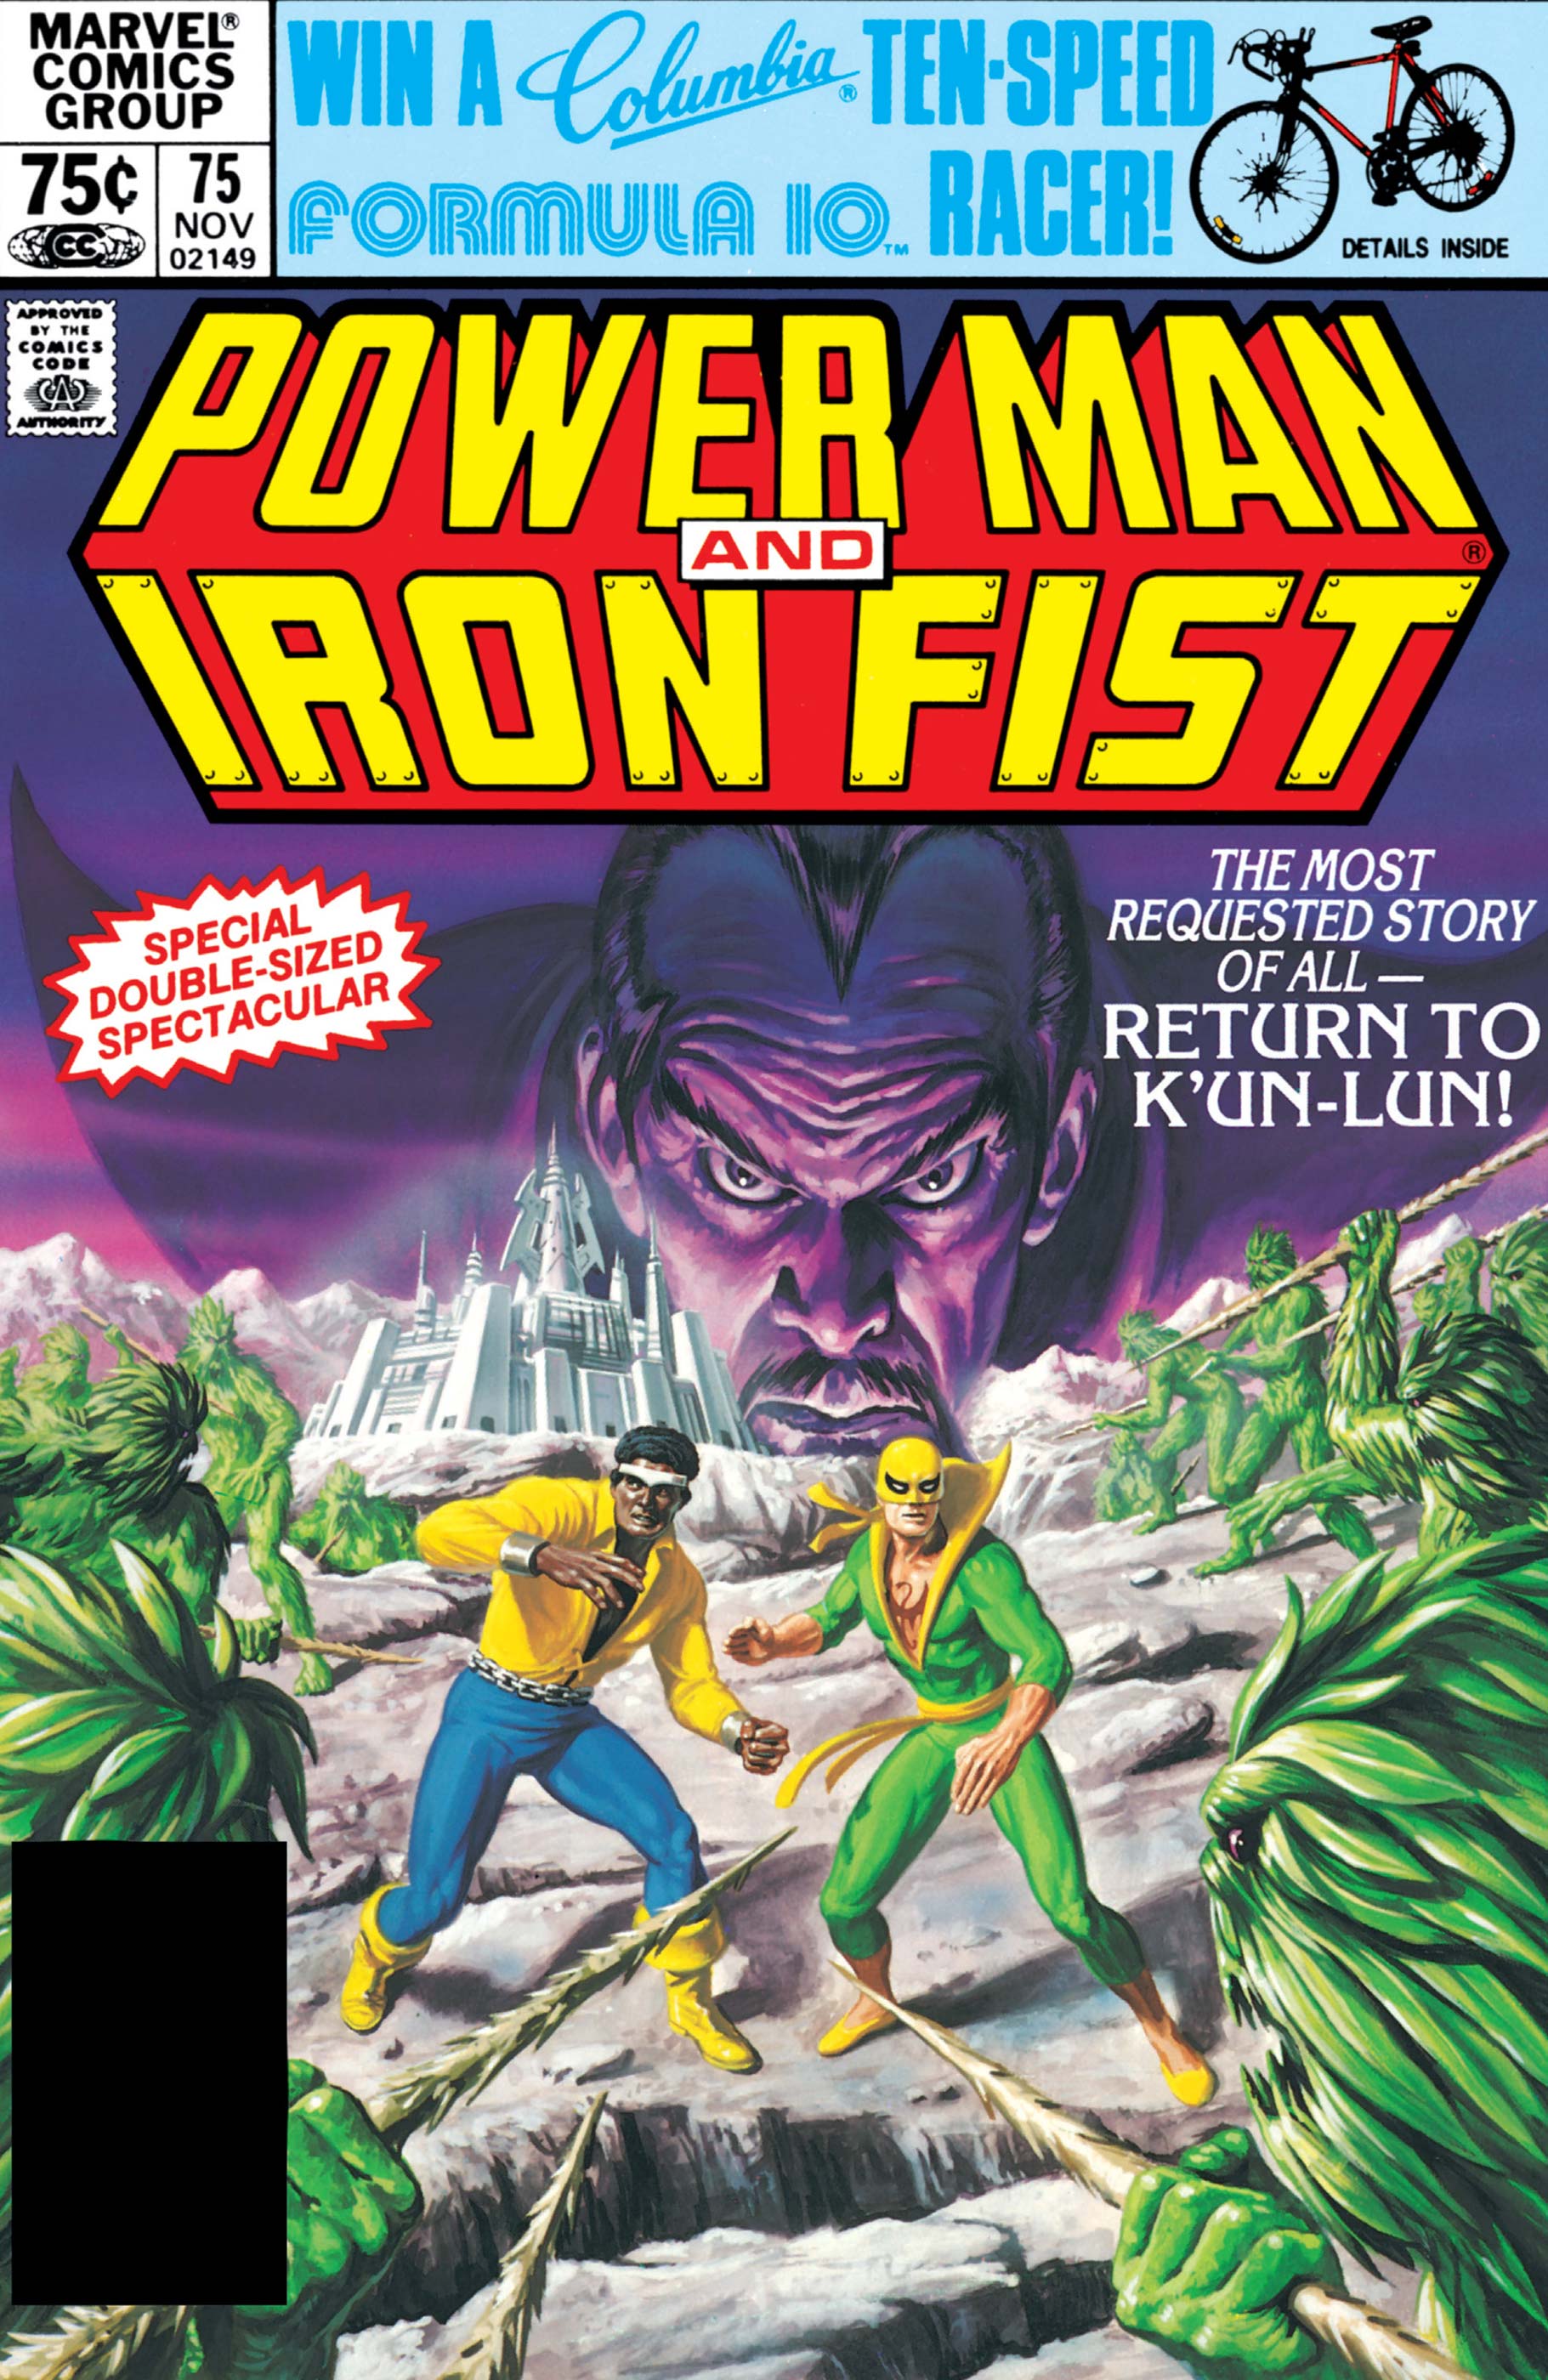 Power Man and Iron Fist (1978) #75